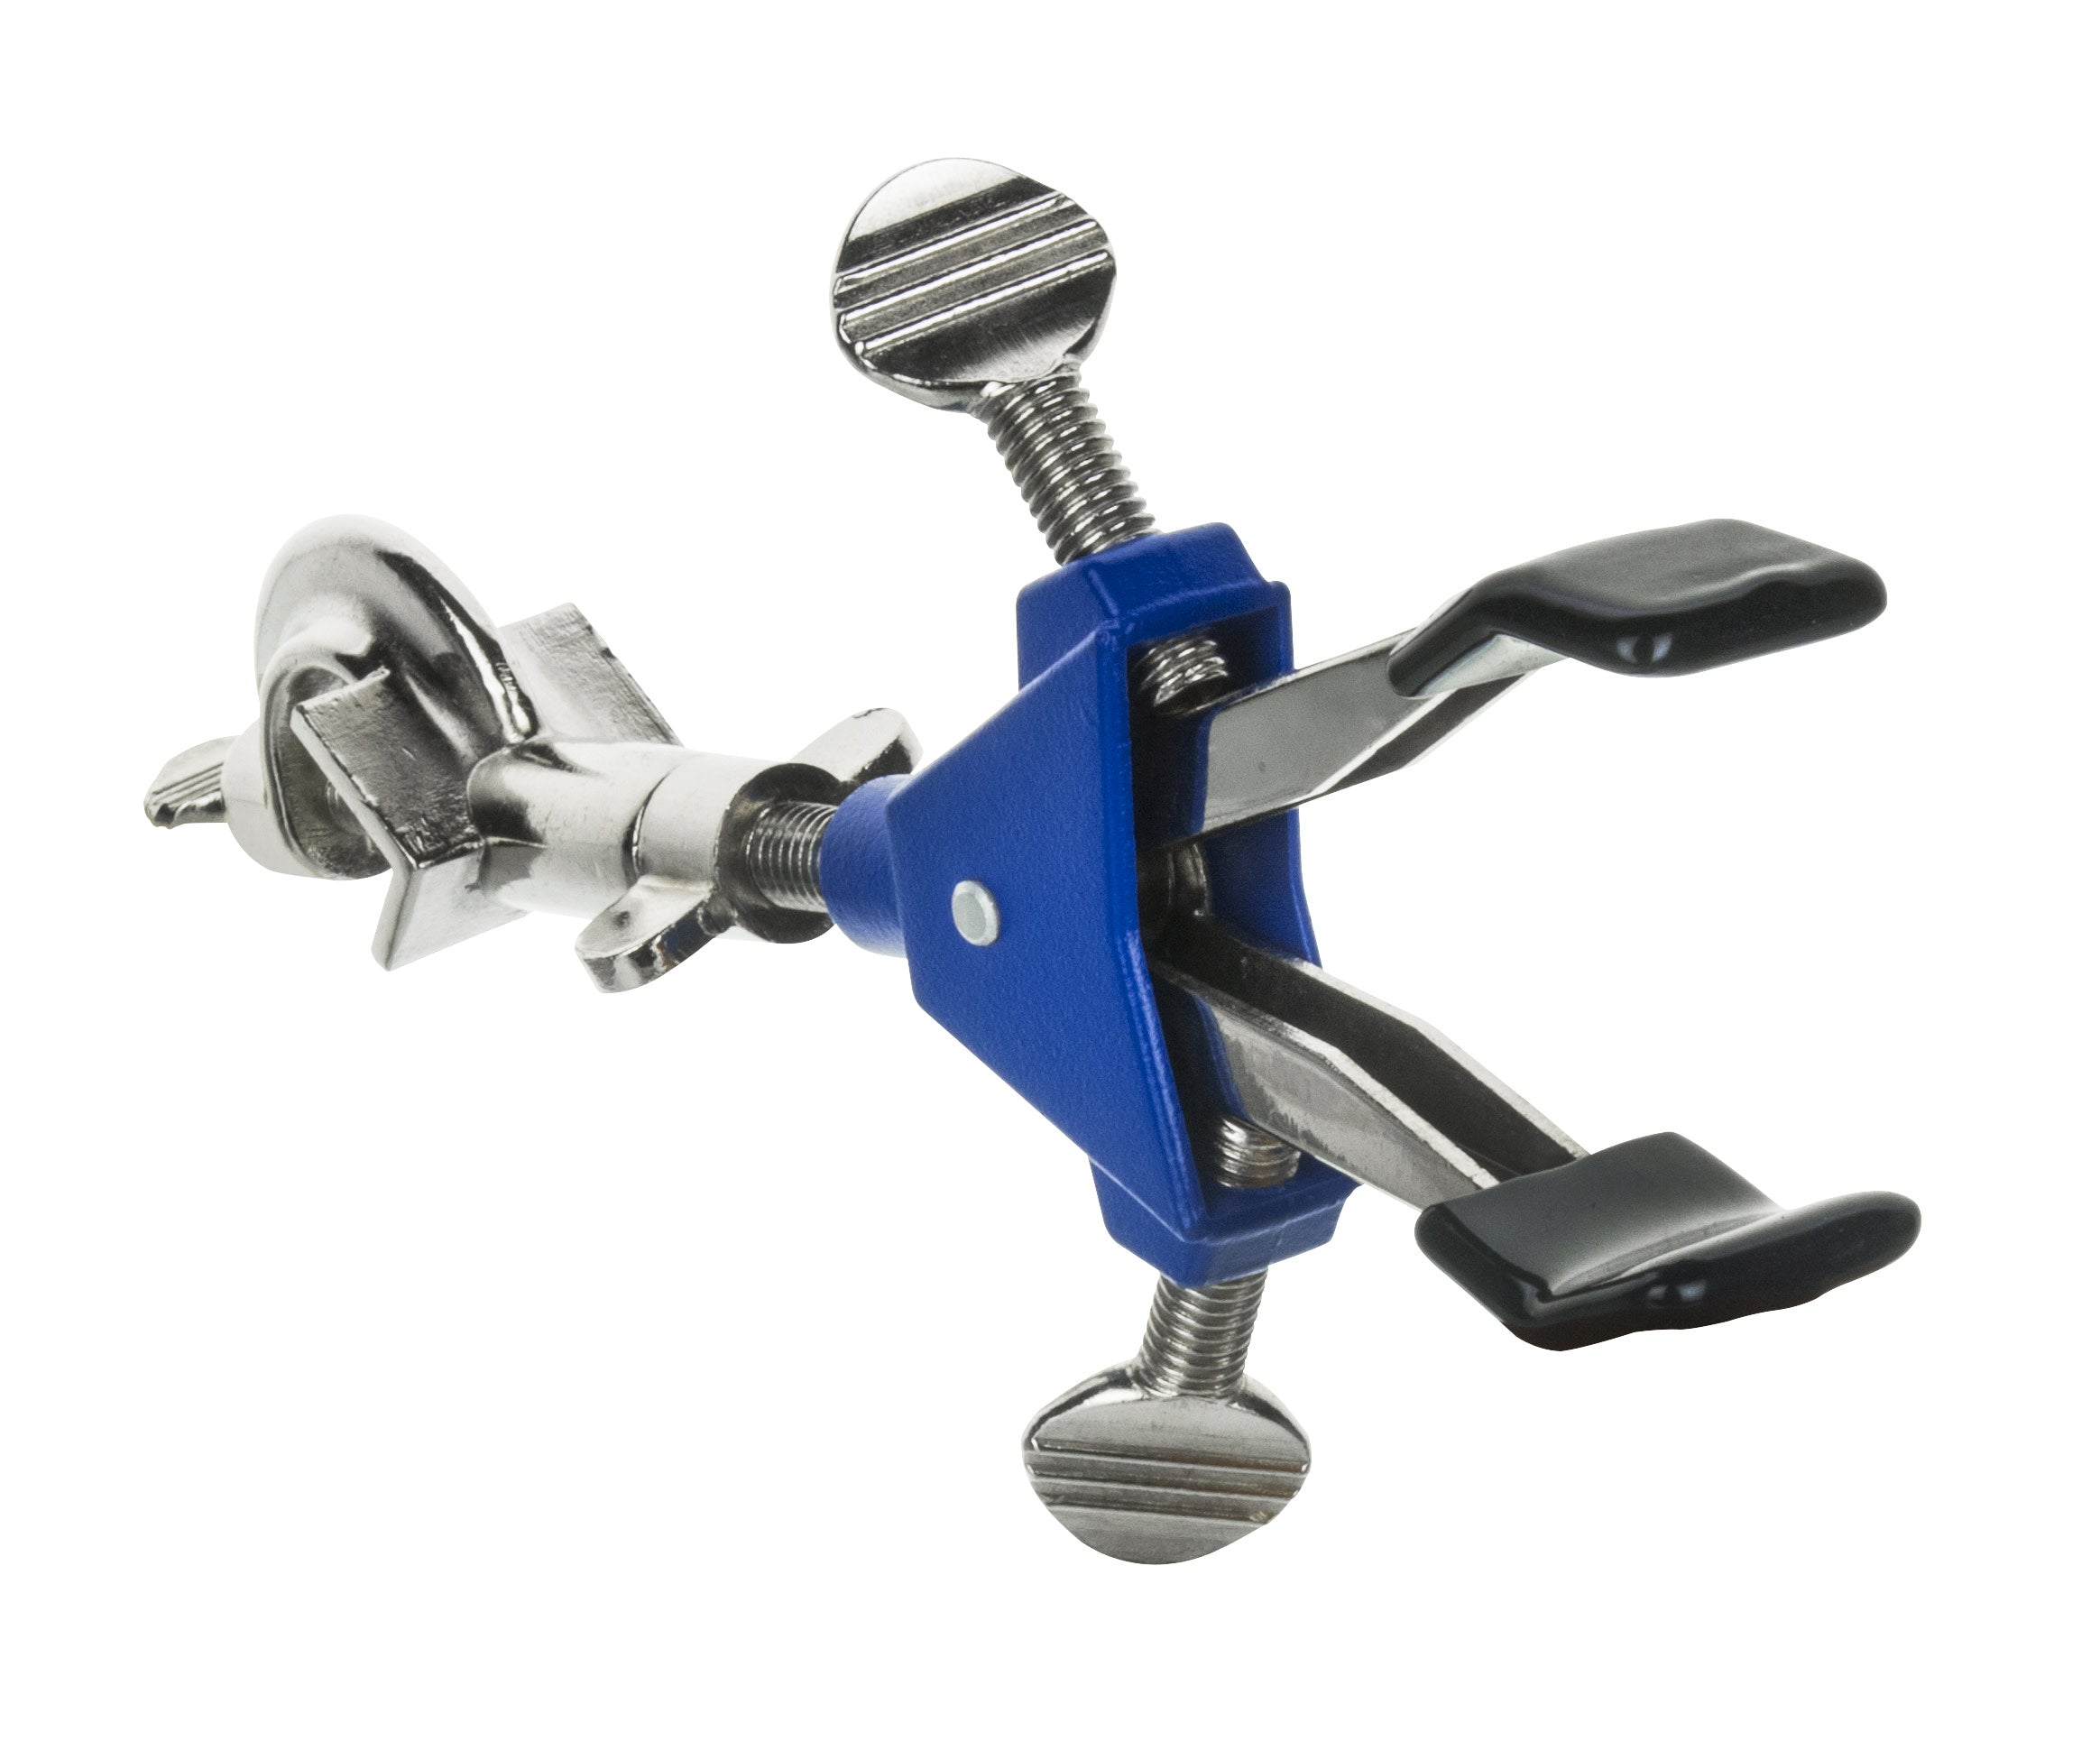 2 Prong, Vinyl Coated, Dual Adjustment Lab Clamp with Boss Head,  2.75" (7 cm) Maximum Clamp Opening